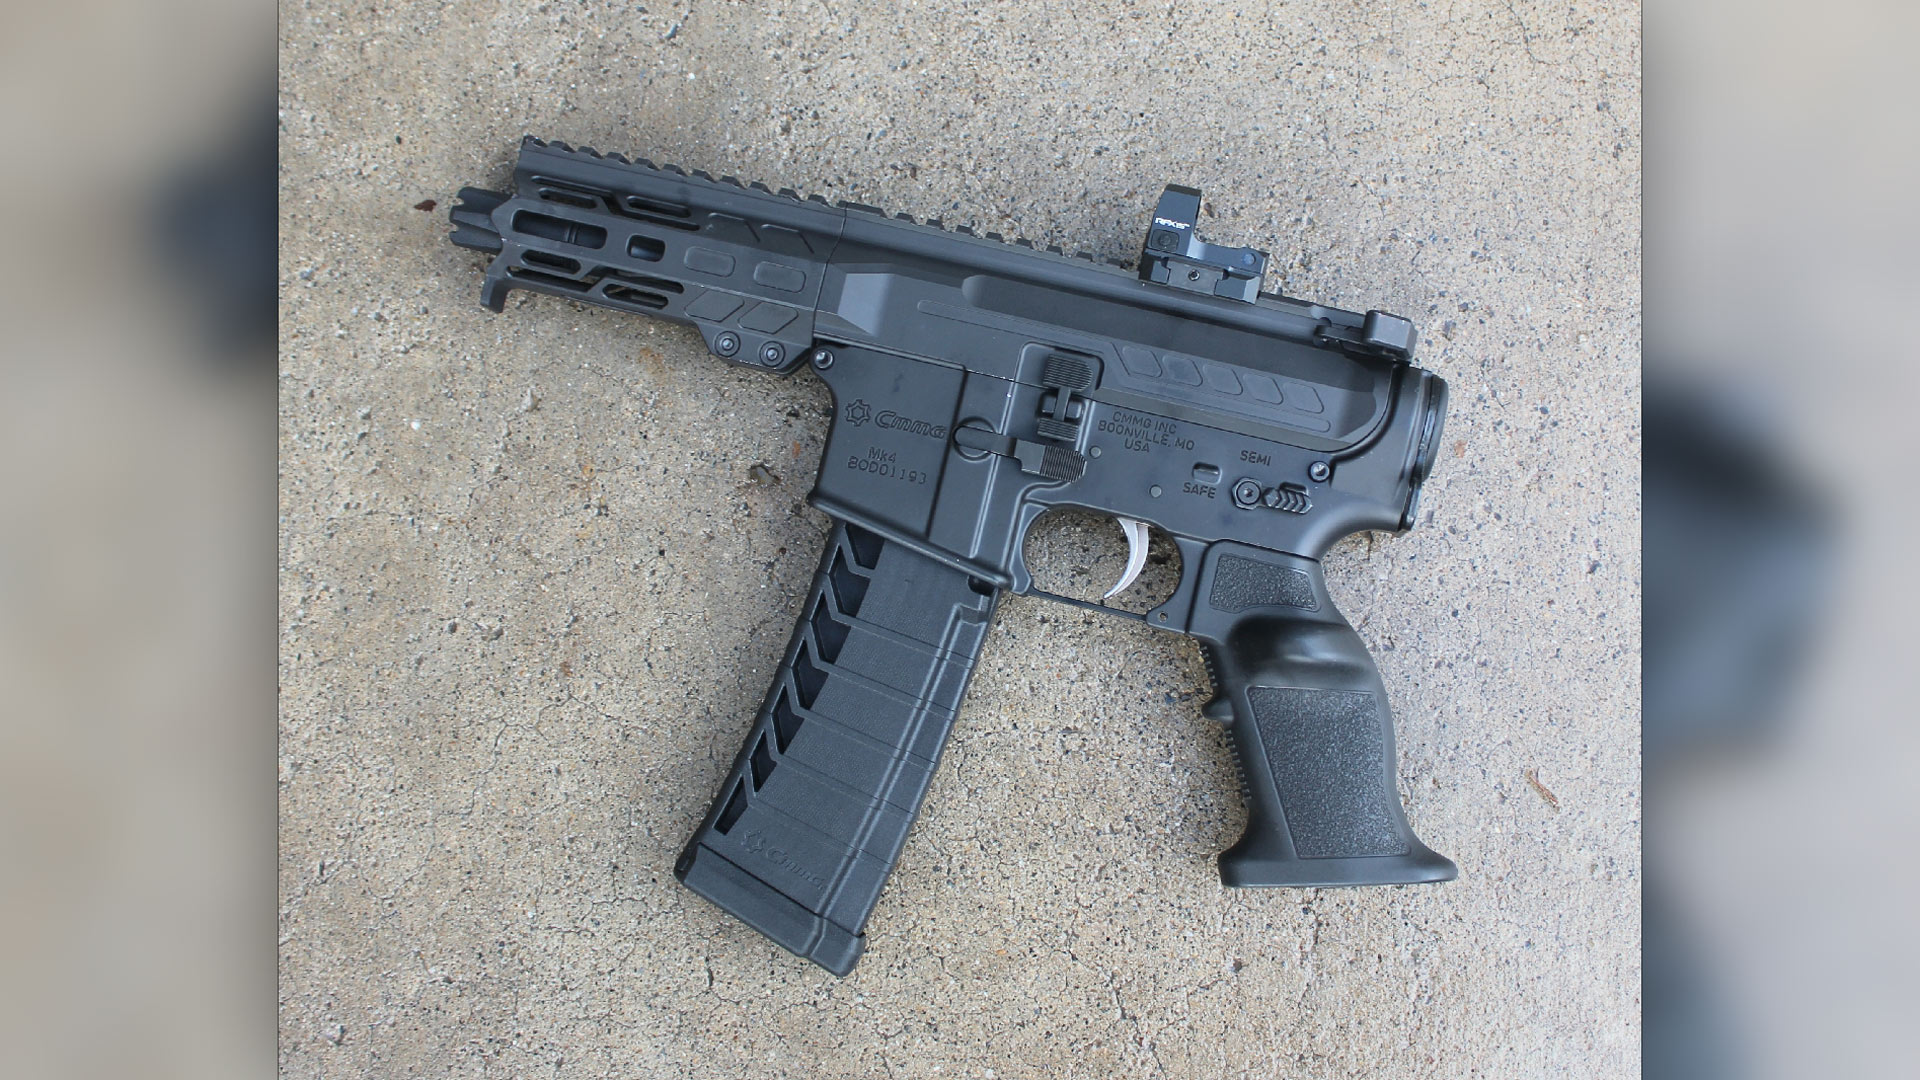 PISTOL, BANSHEE, Mk4, .22LR, 4.5  CMMG - AR 15 and AR 10 Builds and Parts